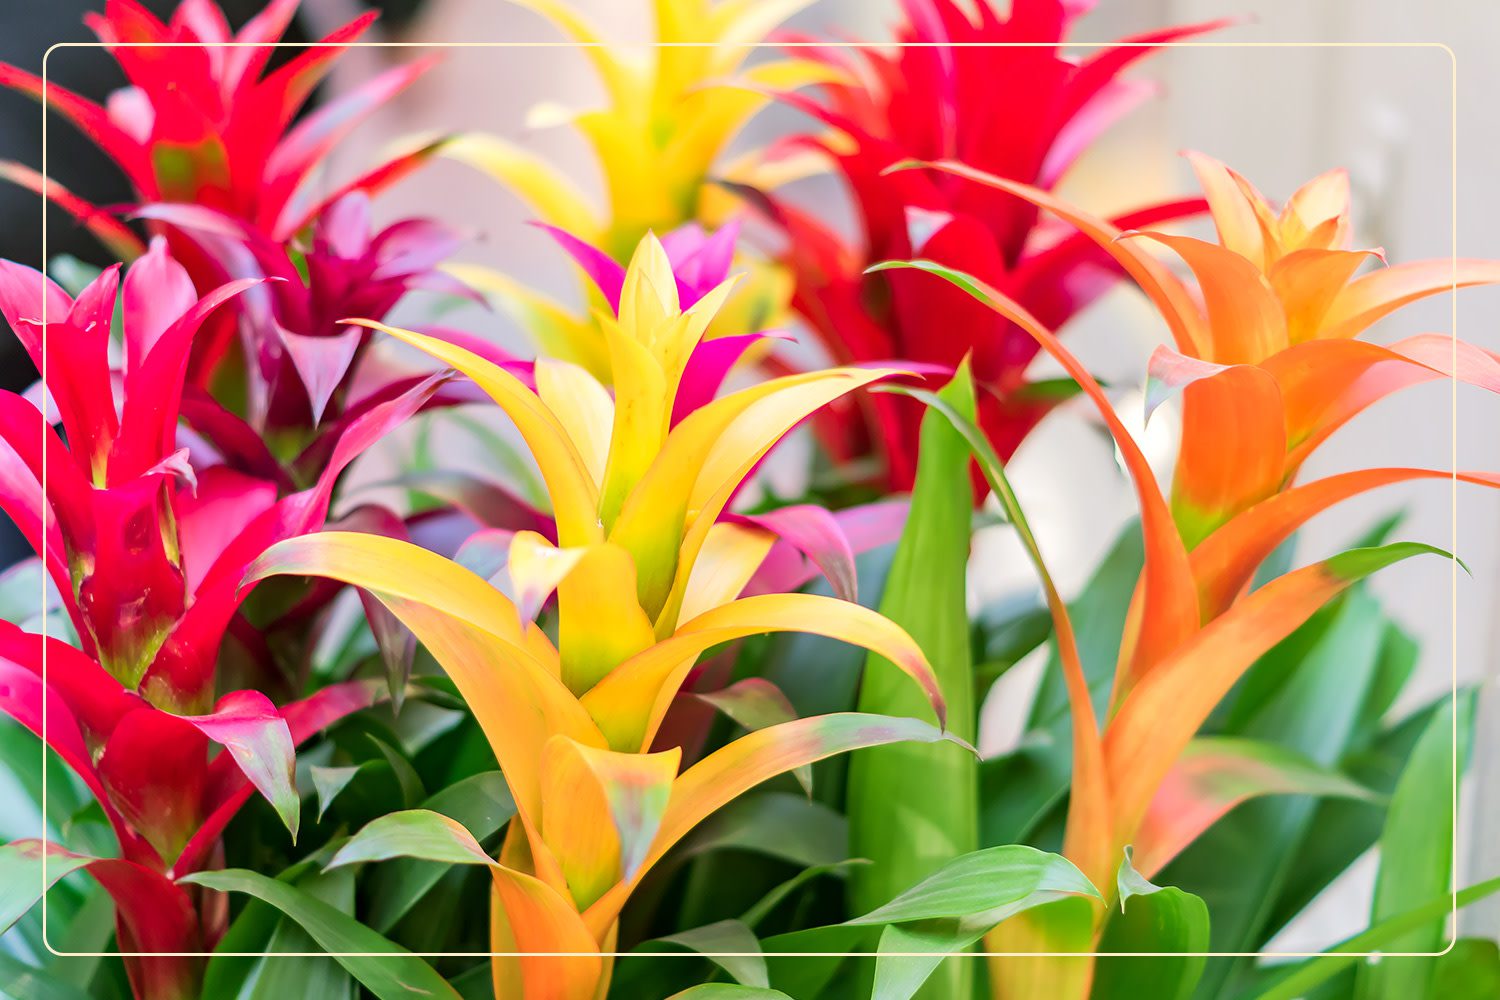 Bromeliads (Bromeliaceae), which are pet-friendly plants, grow in shades of yellow, pink, orange, and red